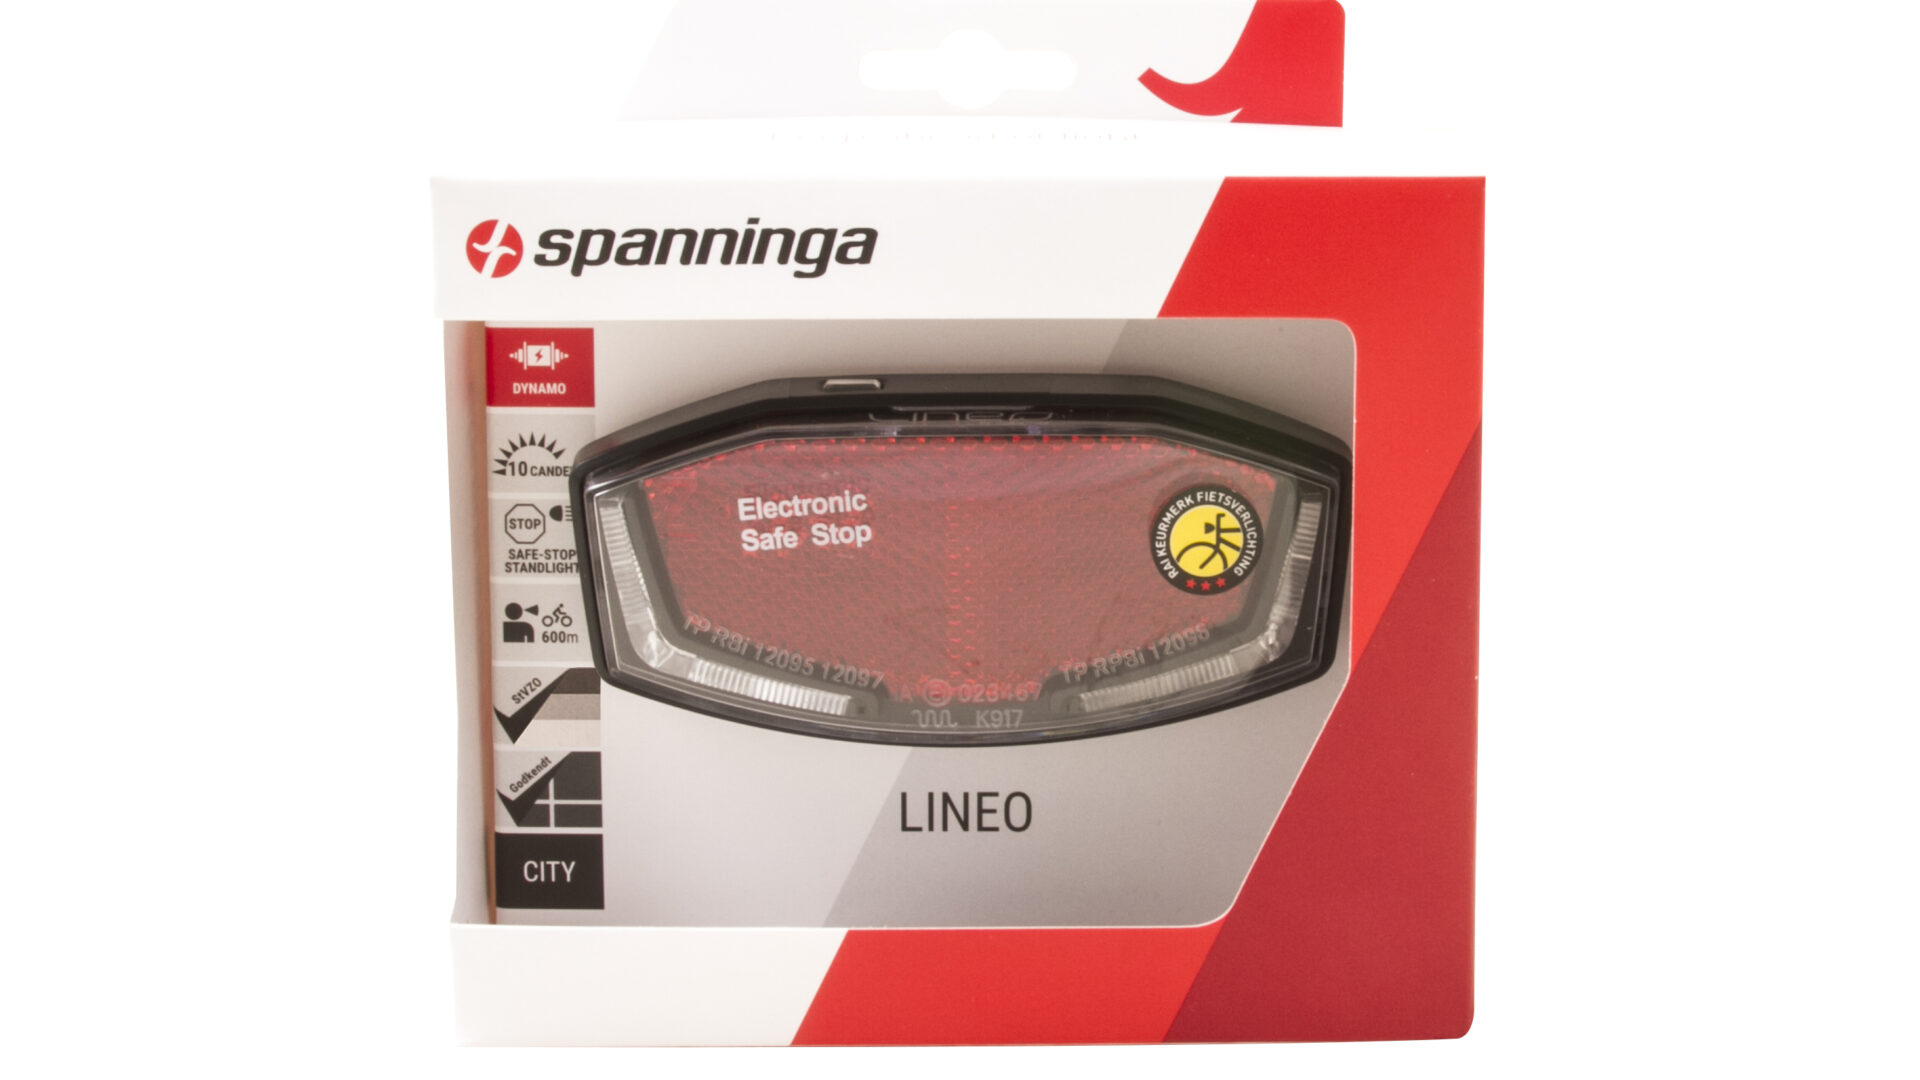 Lineo Dynamo package